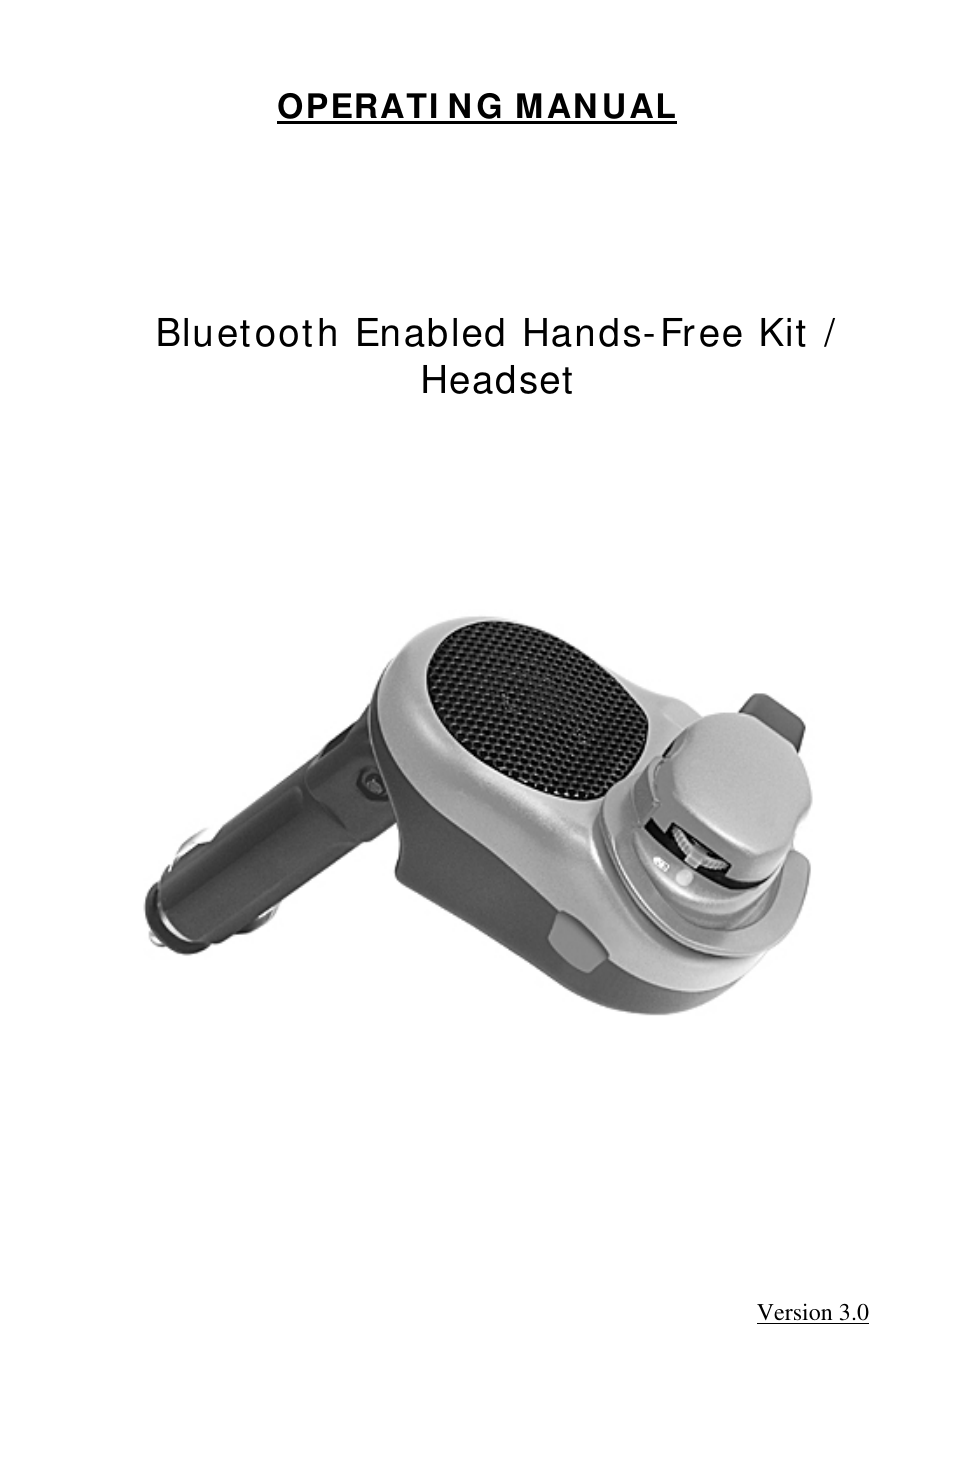 Sony Ericsson Bluetooth Enabled Hands-Free Kit /Headset User Manual | 20 pages